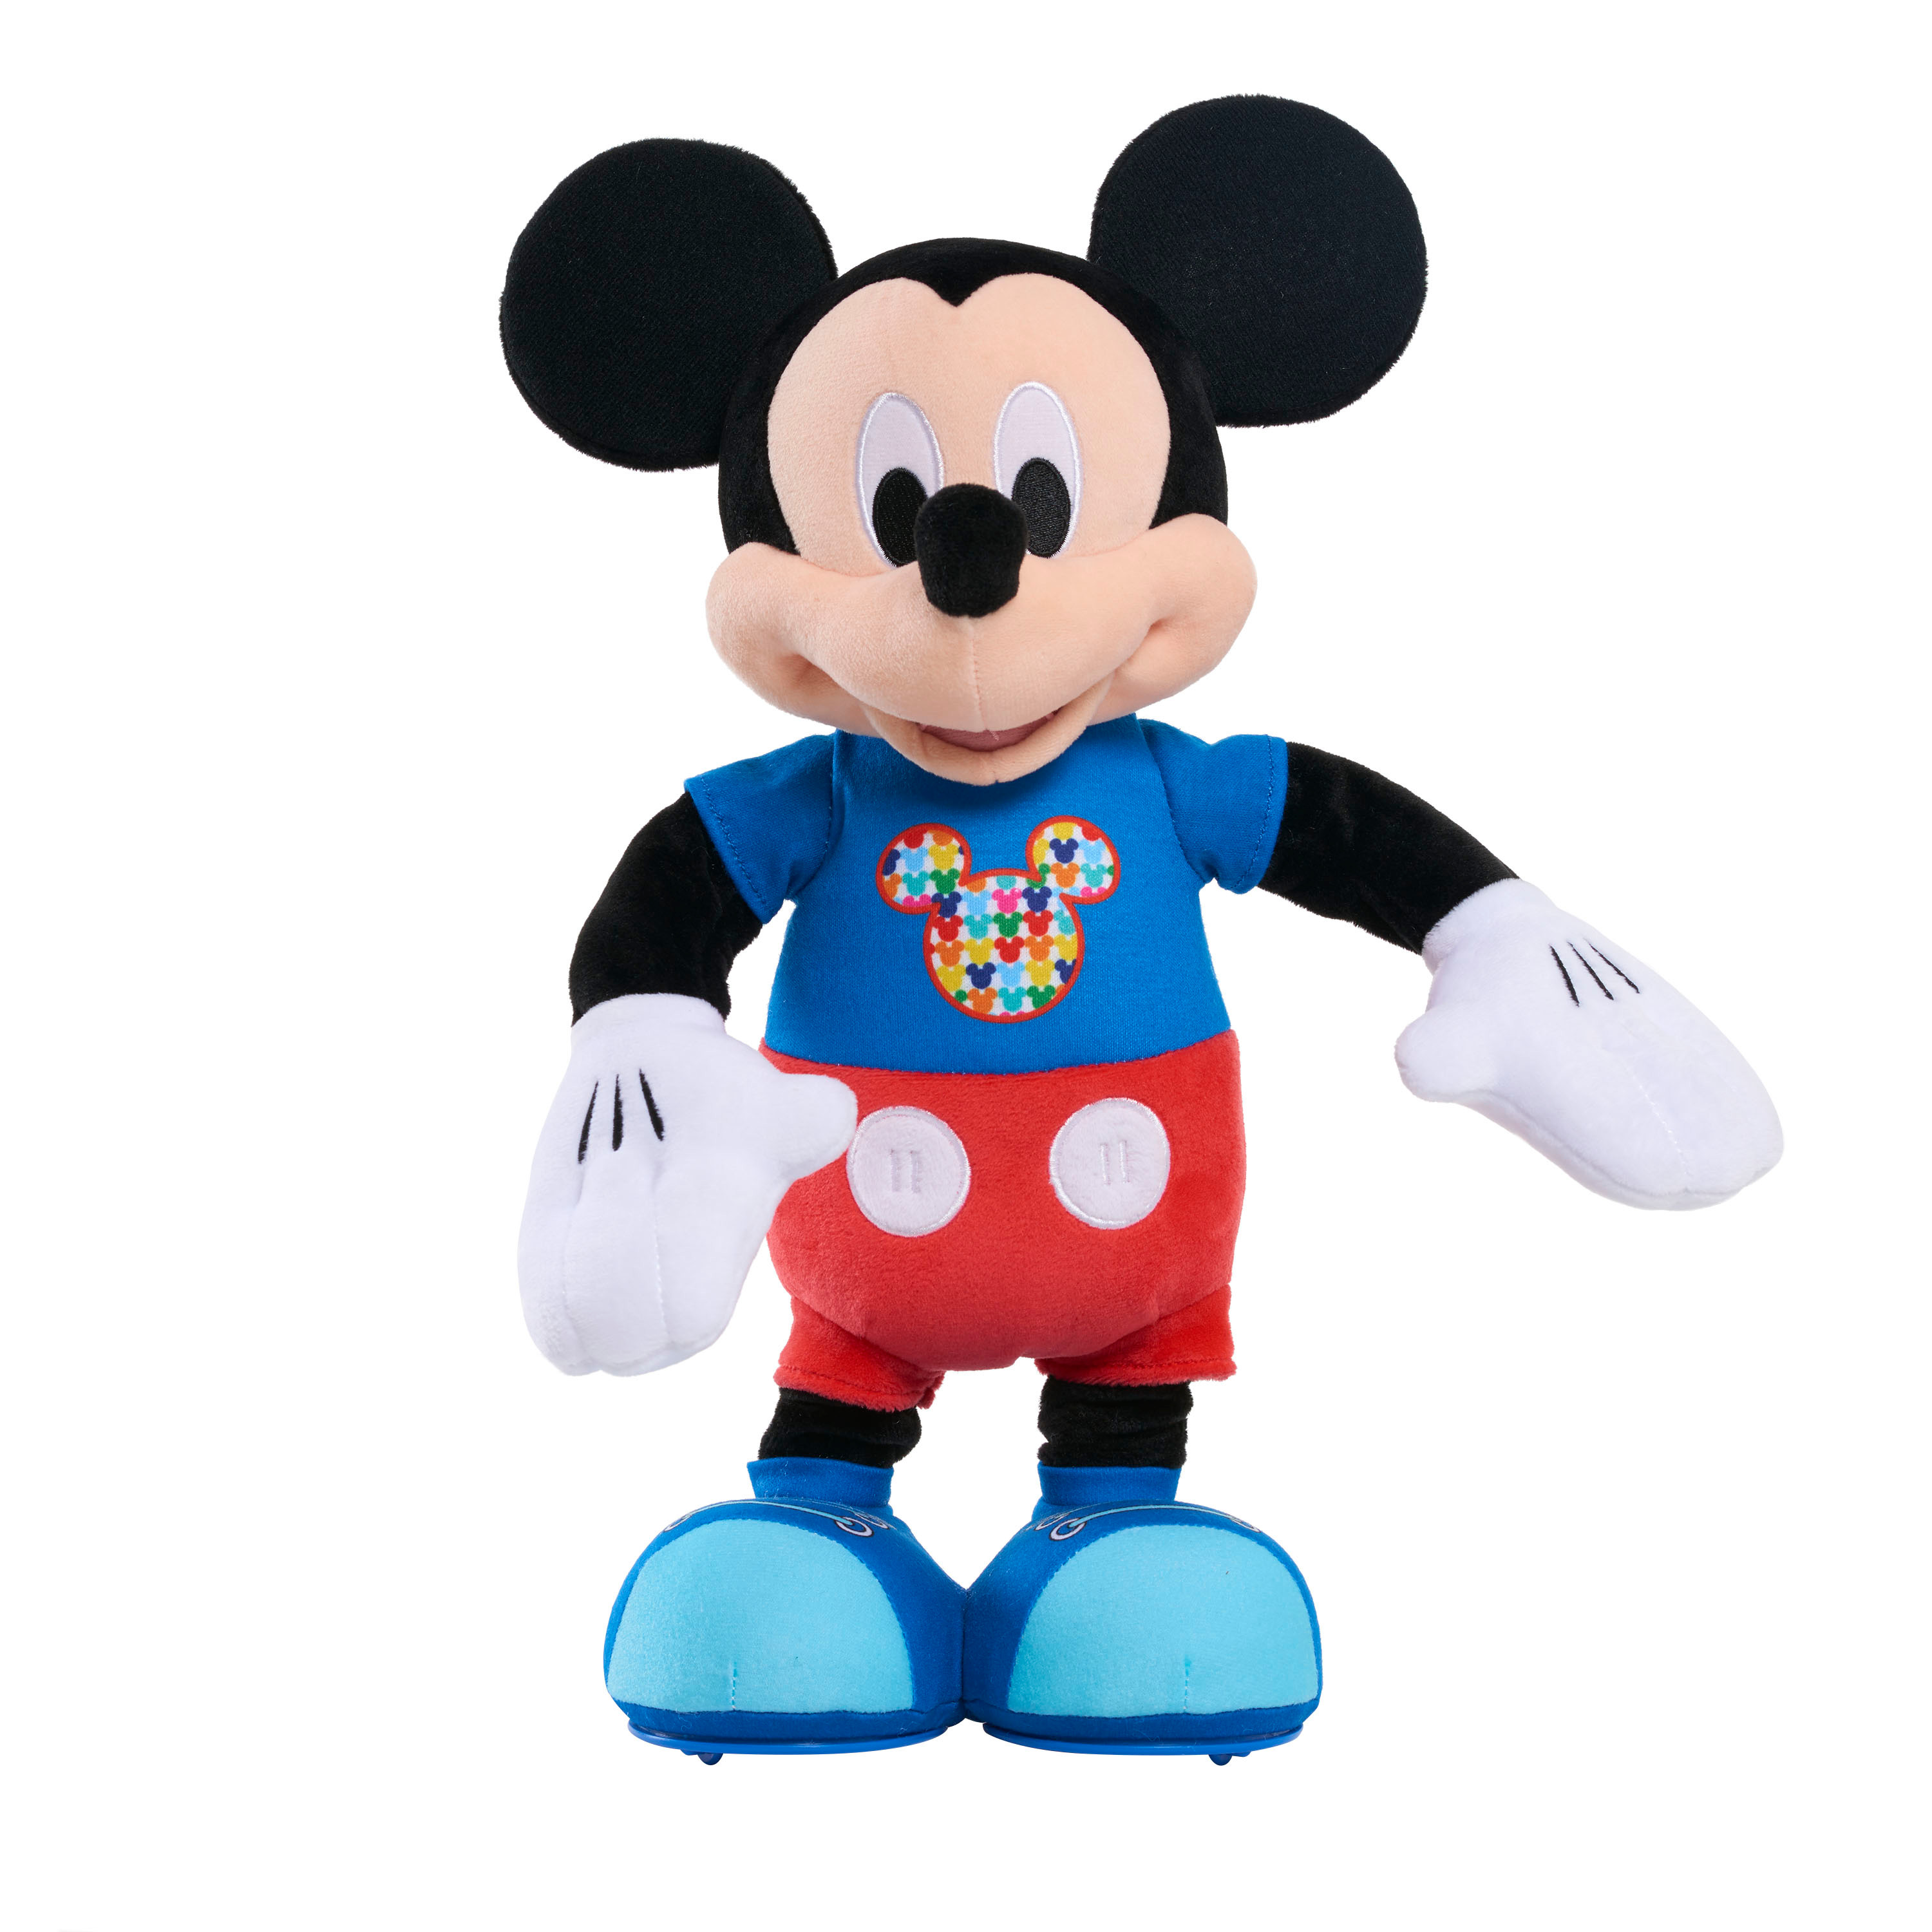 Disney Junior Hot Dog Dance Break Mickey Mouse, Interactive Plush Toy, Lights Up and Sings "Hot Dog Song" and Plays “Color Detective” Game, Kids Toys for Ages 3 up - image 1 of 4